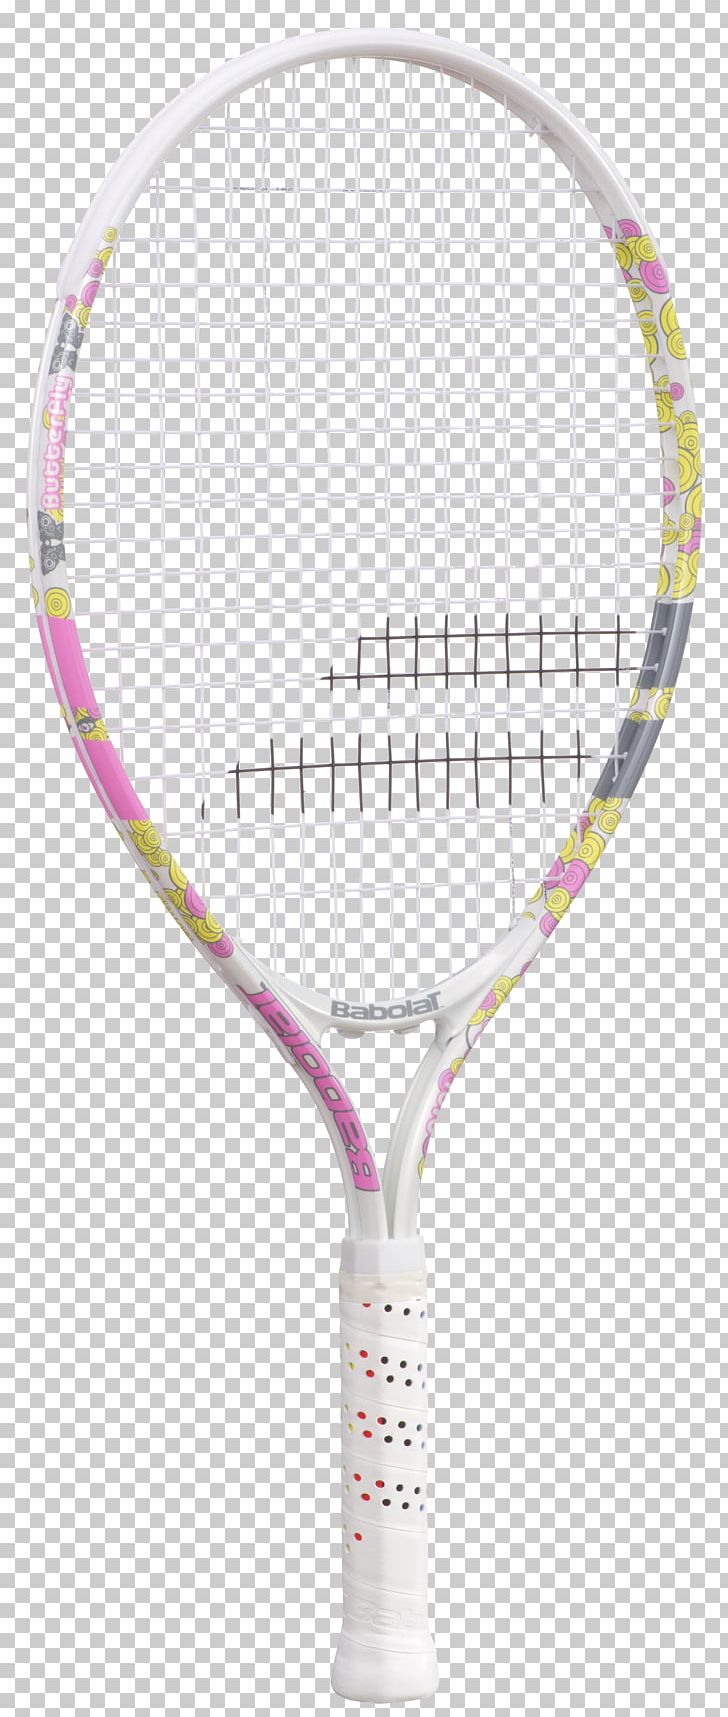 Racket Strings Babolat Rakieta Tenisowa Tennis PNG, Clipart, Babolat, Backhand, Composite Material, Forehand, Game Free PNG Download